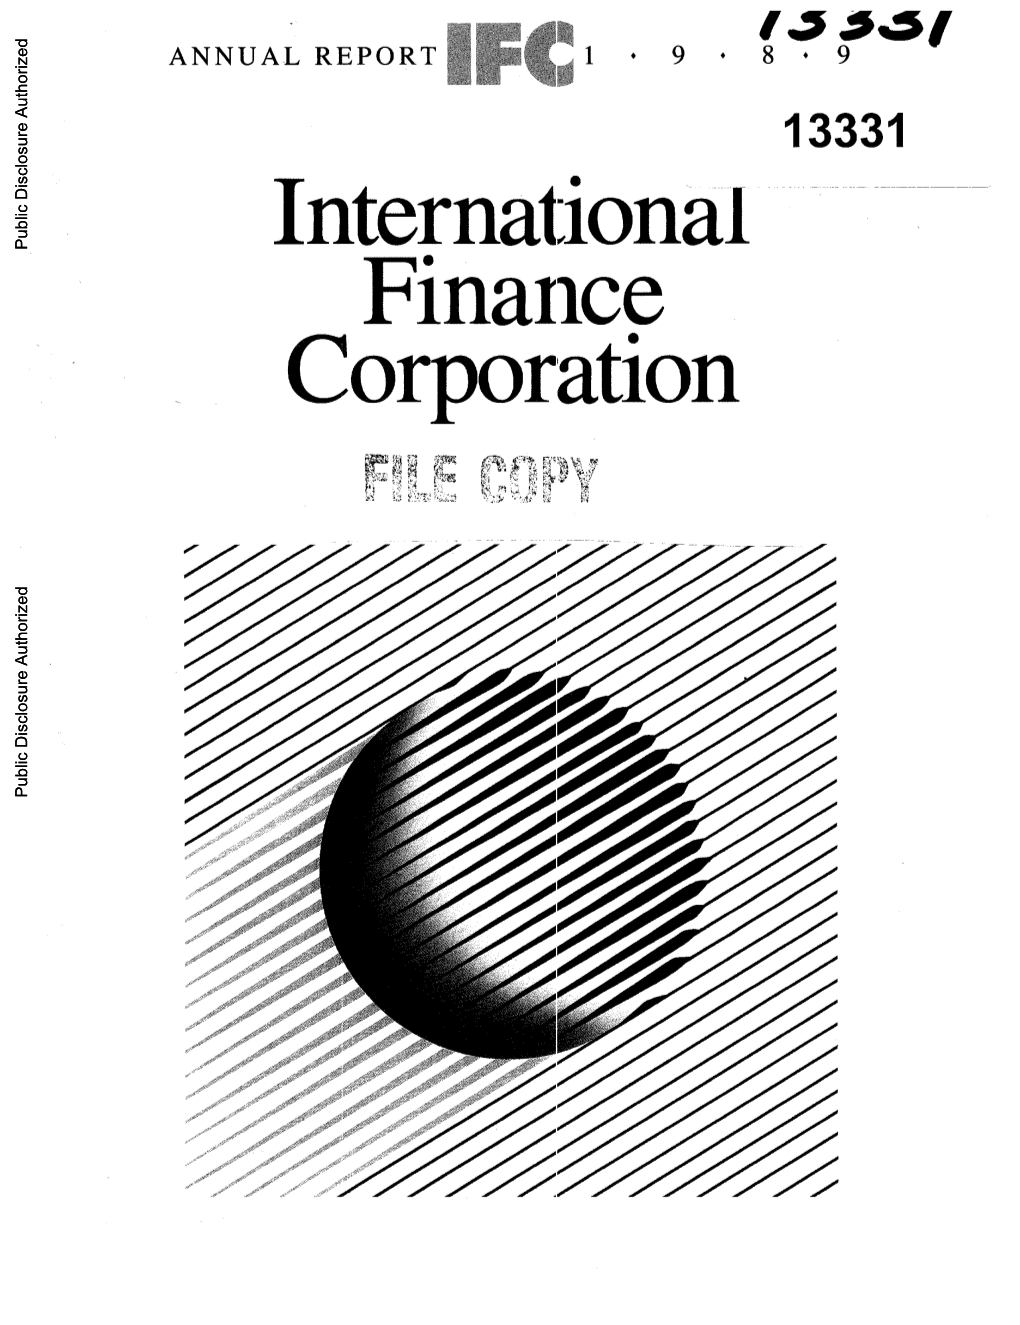 Finance Corporation (IFC) Is a Multilateral Development Institution